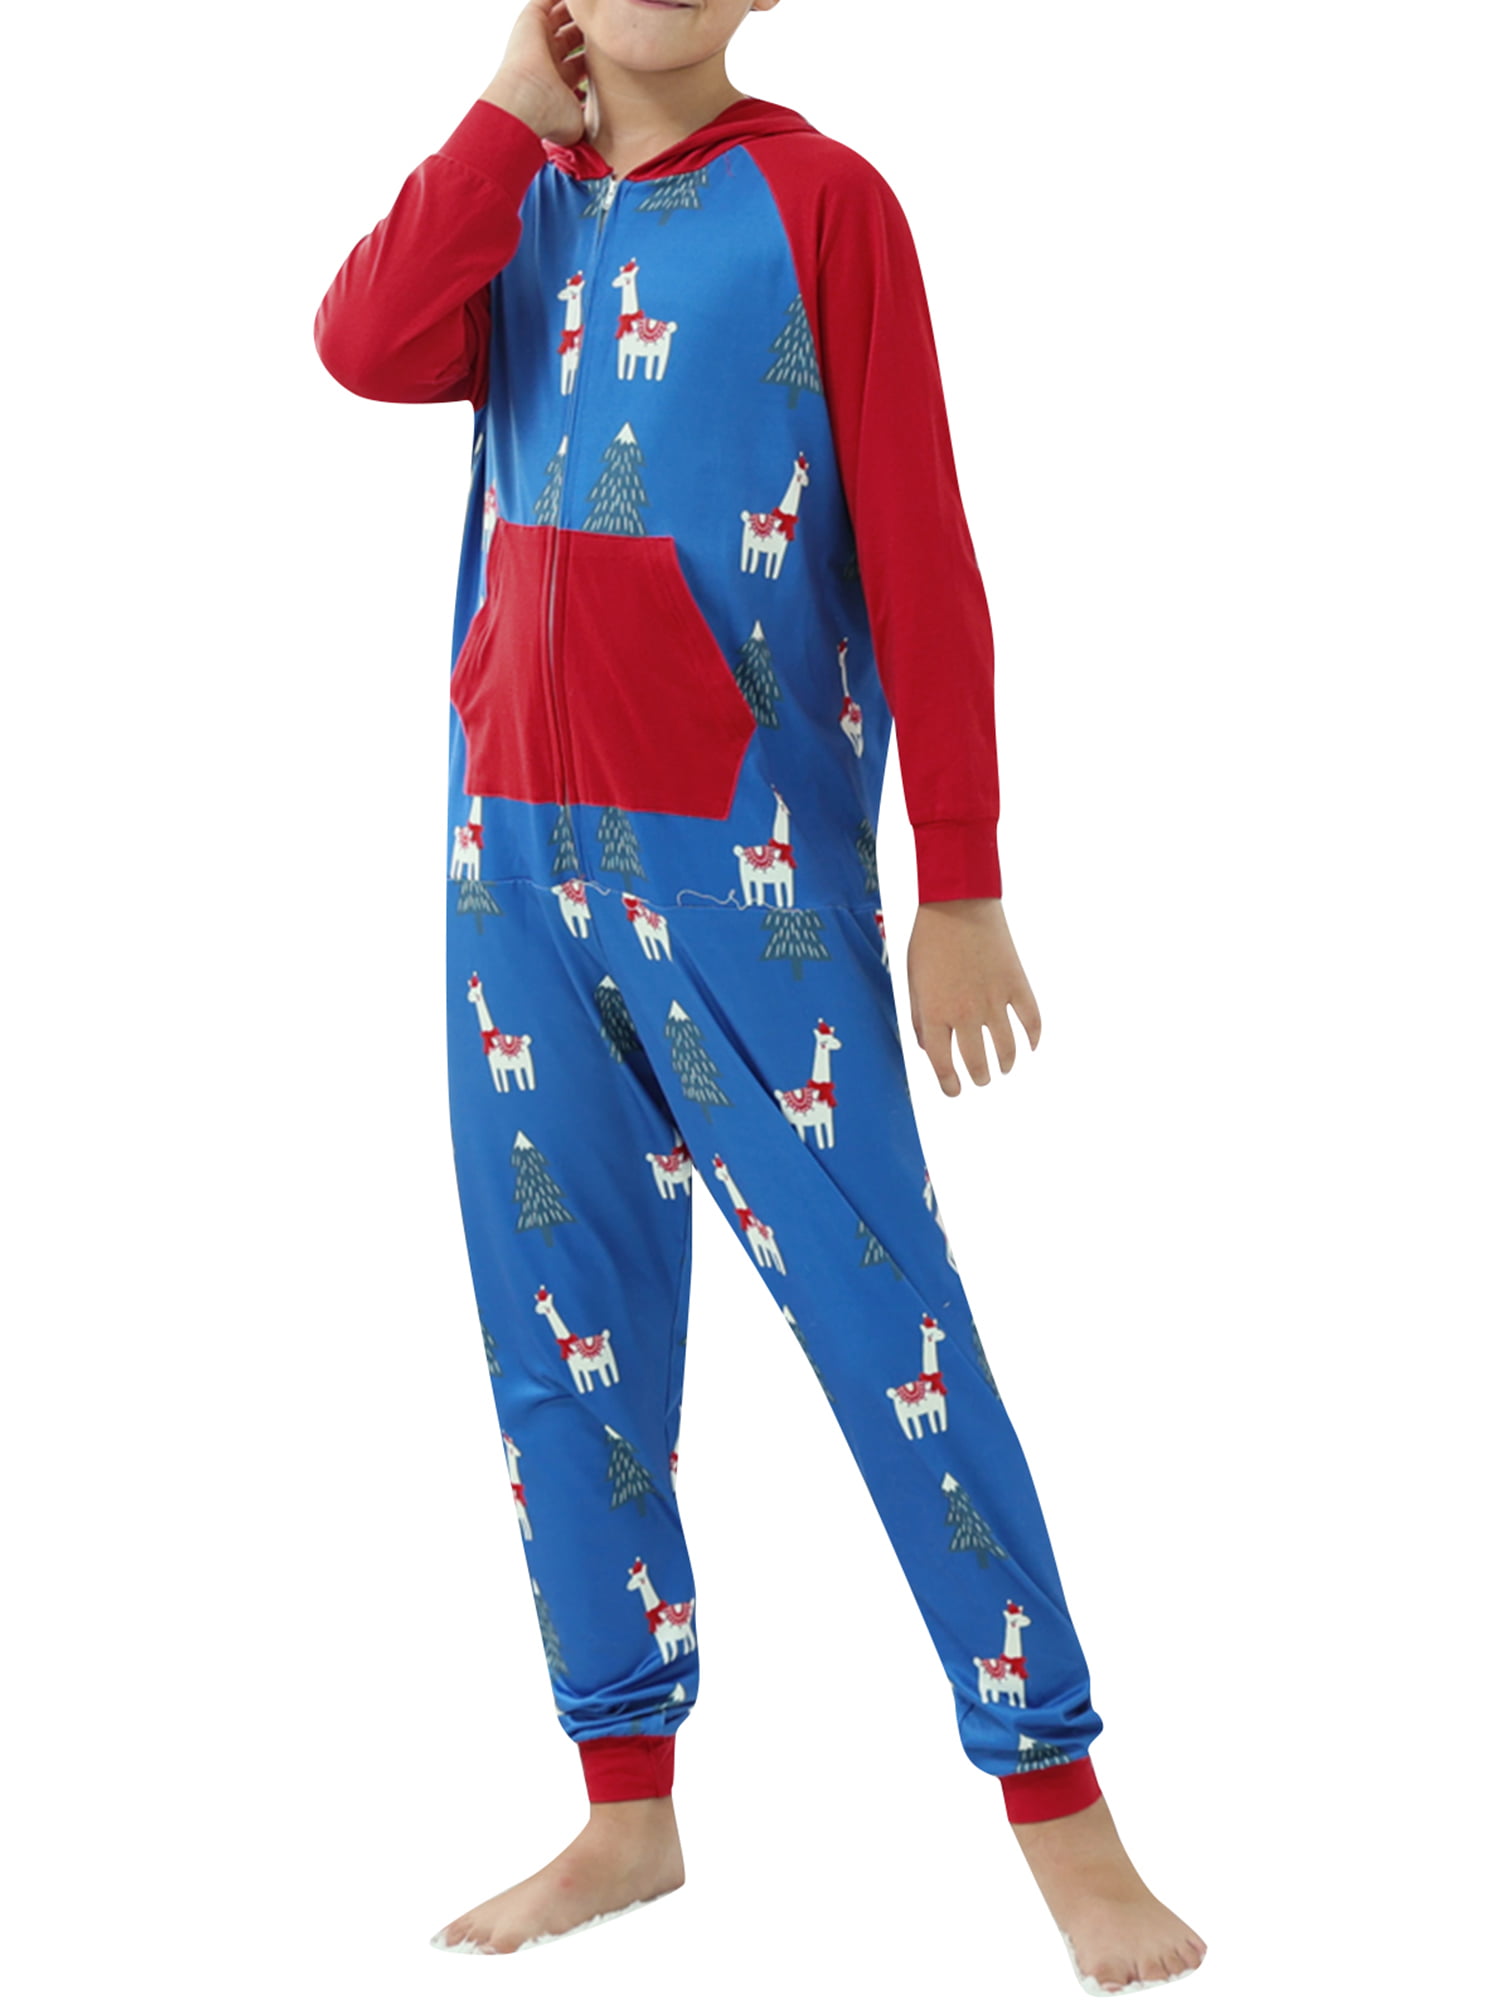 Ages 18-24 Months and 2-3,3-4,4-5 Years Boys Girls Paw Patrol Pyjamas Red  Blue 